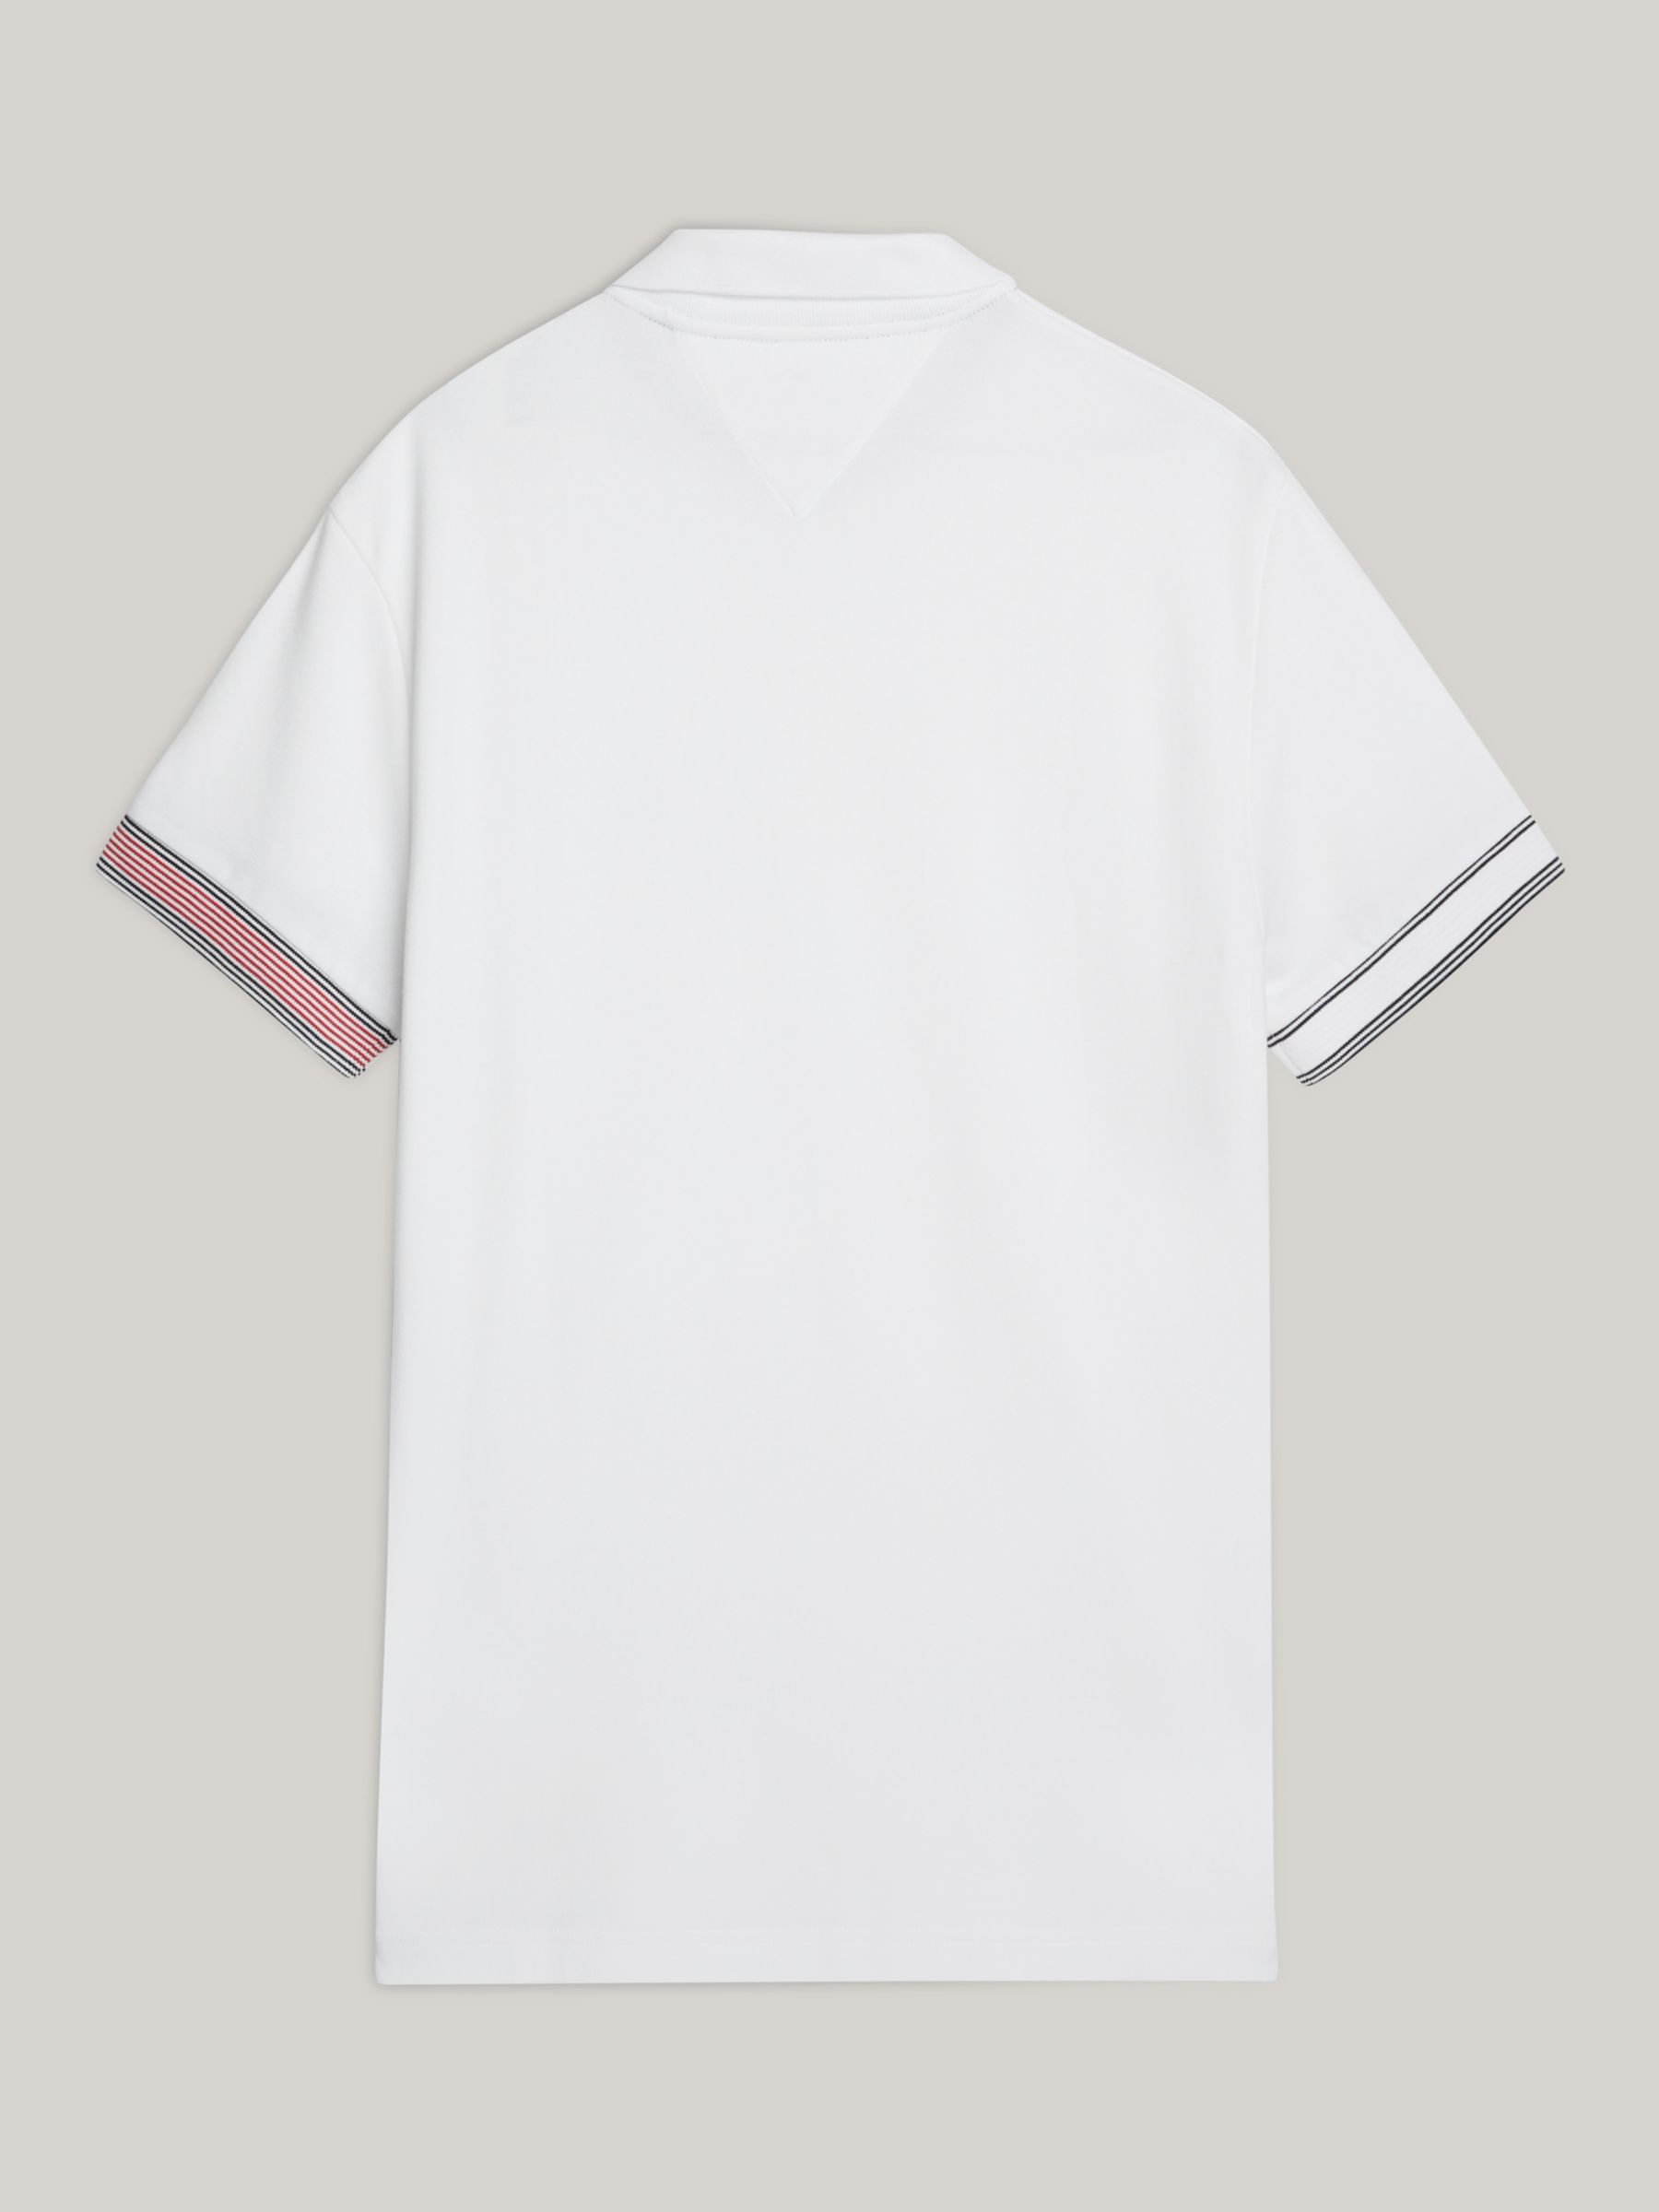 Tommy Hilfiger Adaptive Slim Fit Polo Top, White, L